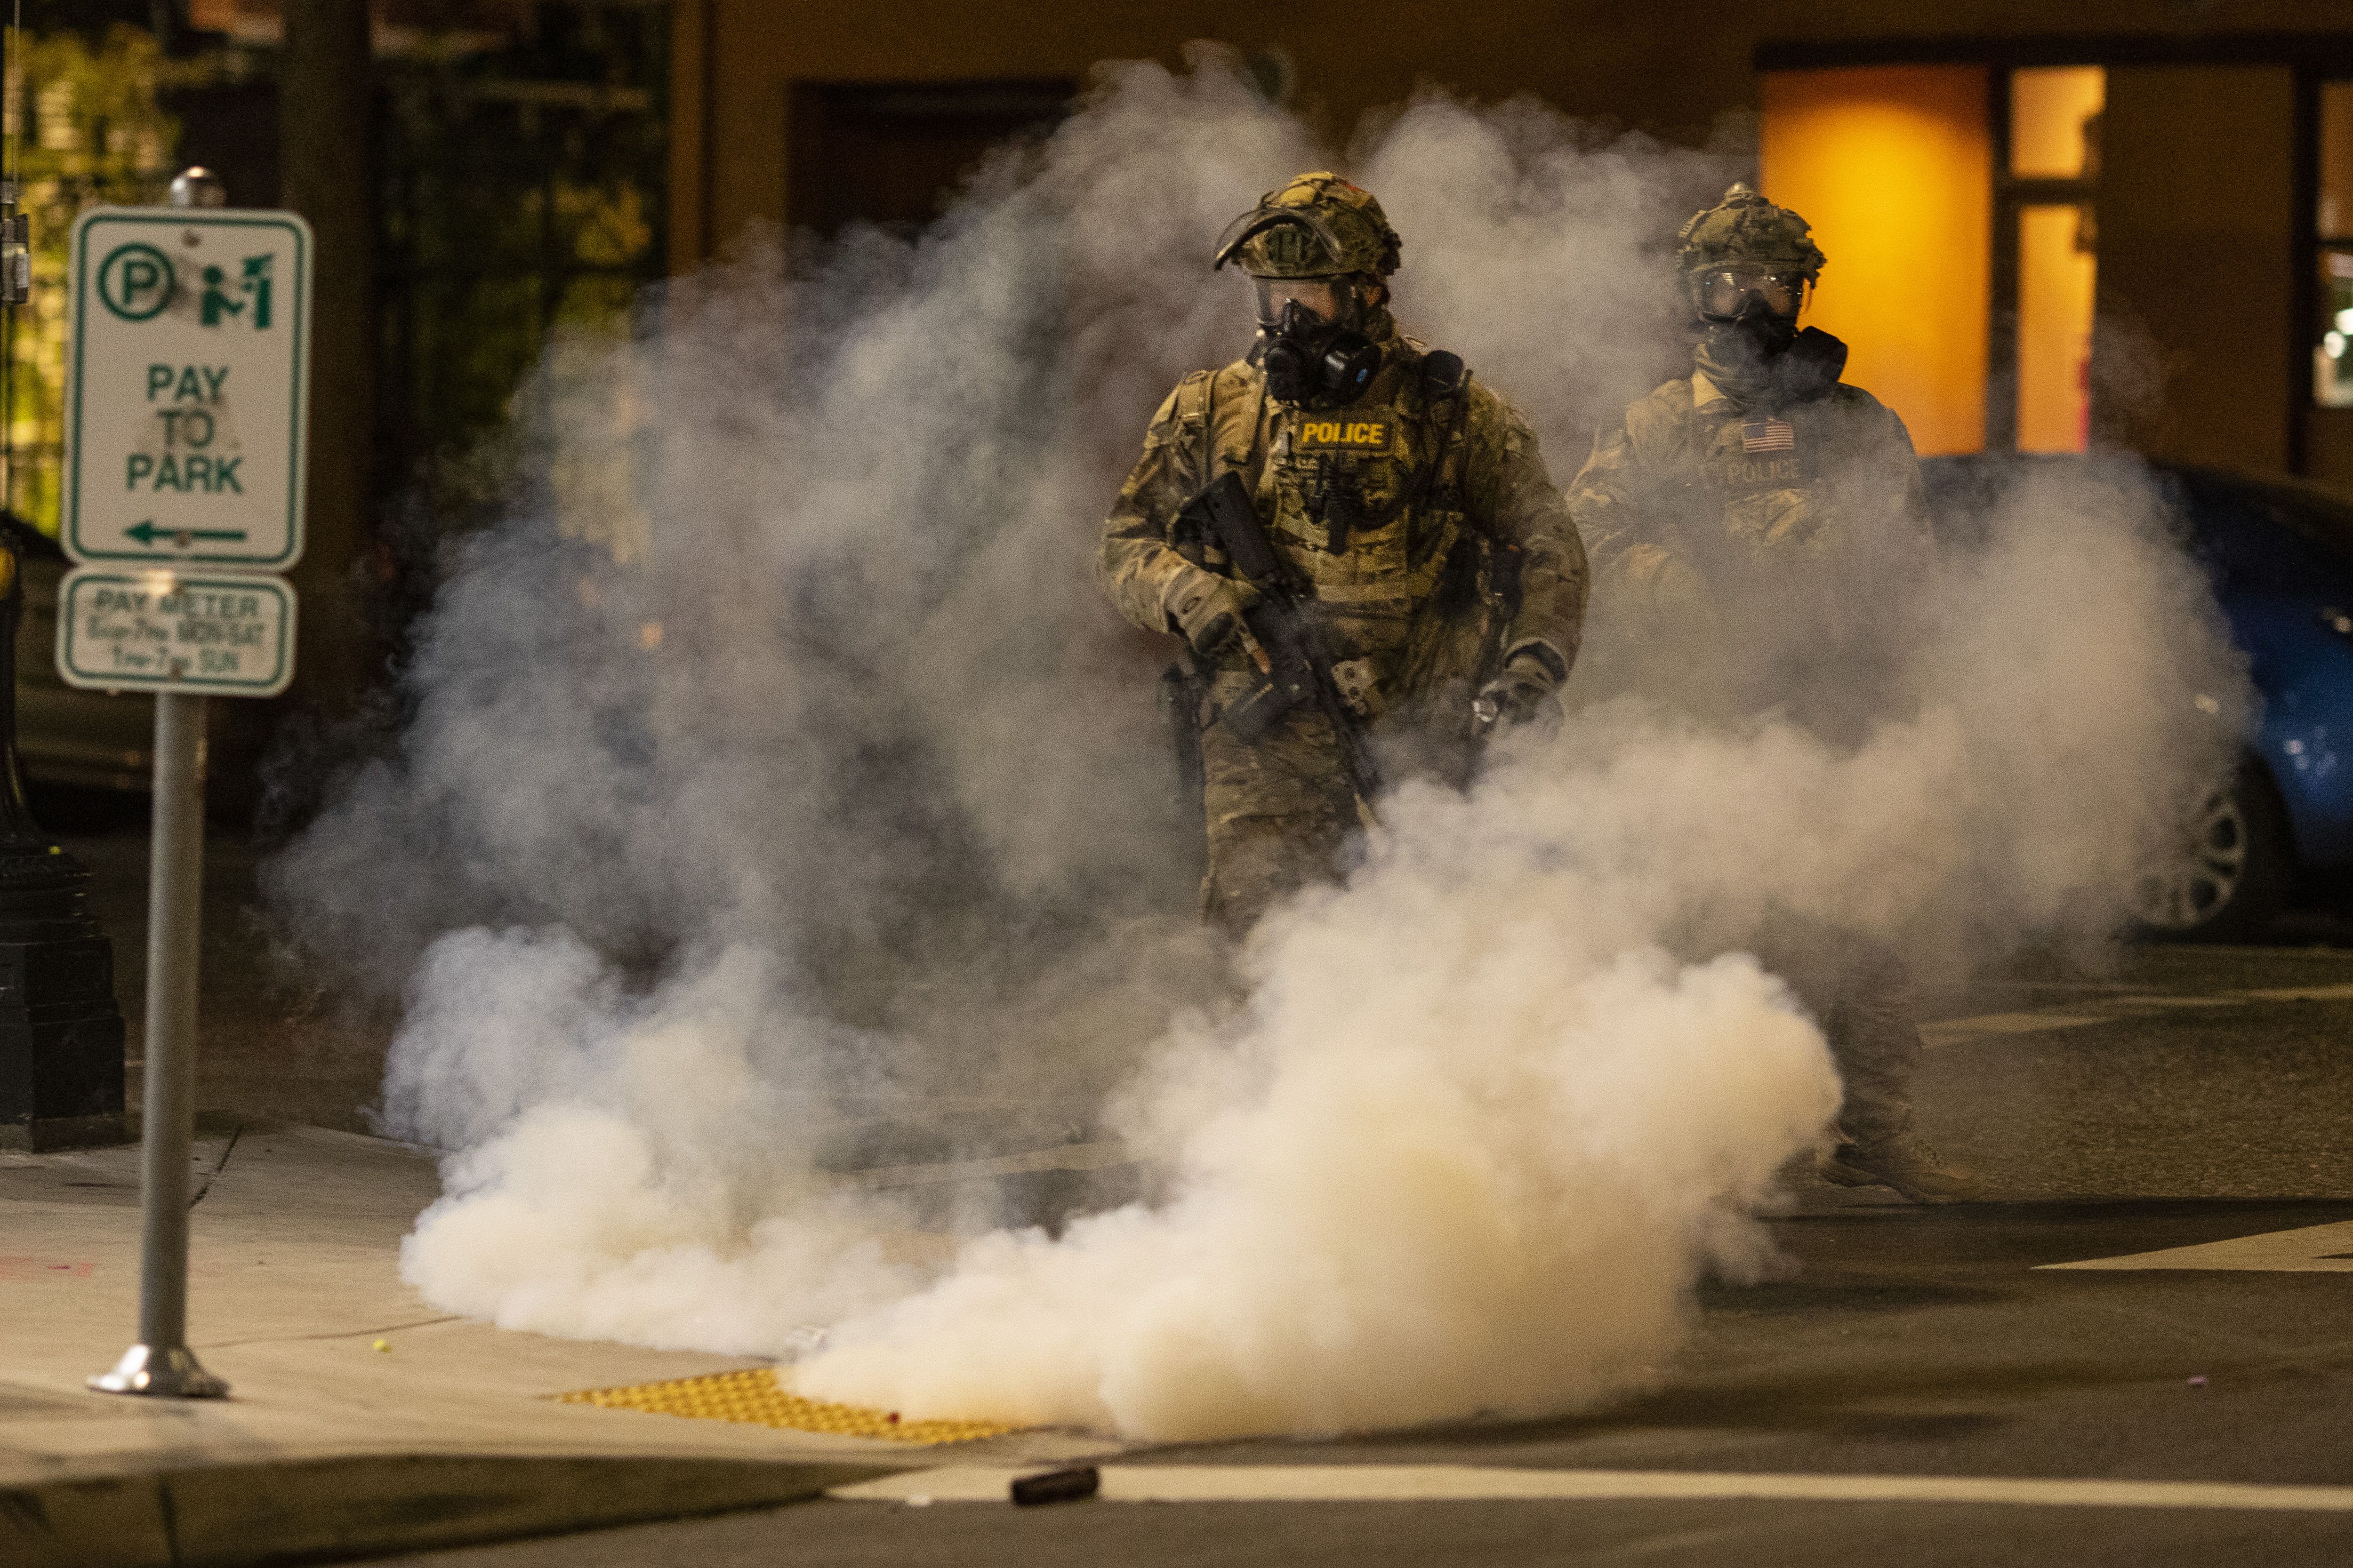 Federal officers operate amid tear gas while clearing the street in front of the Mark O. Hatfield U.S. Courthouse on in Portland, Oregon, on July 21. 